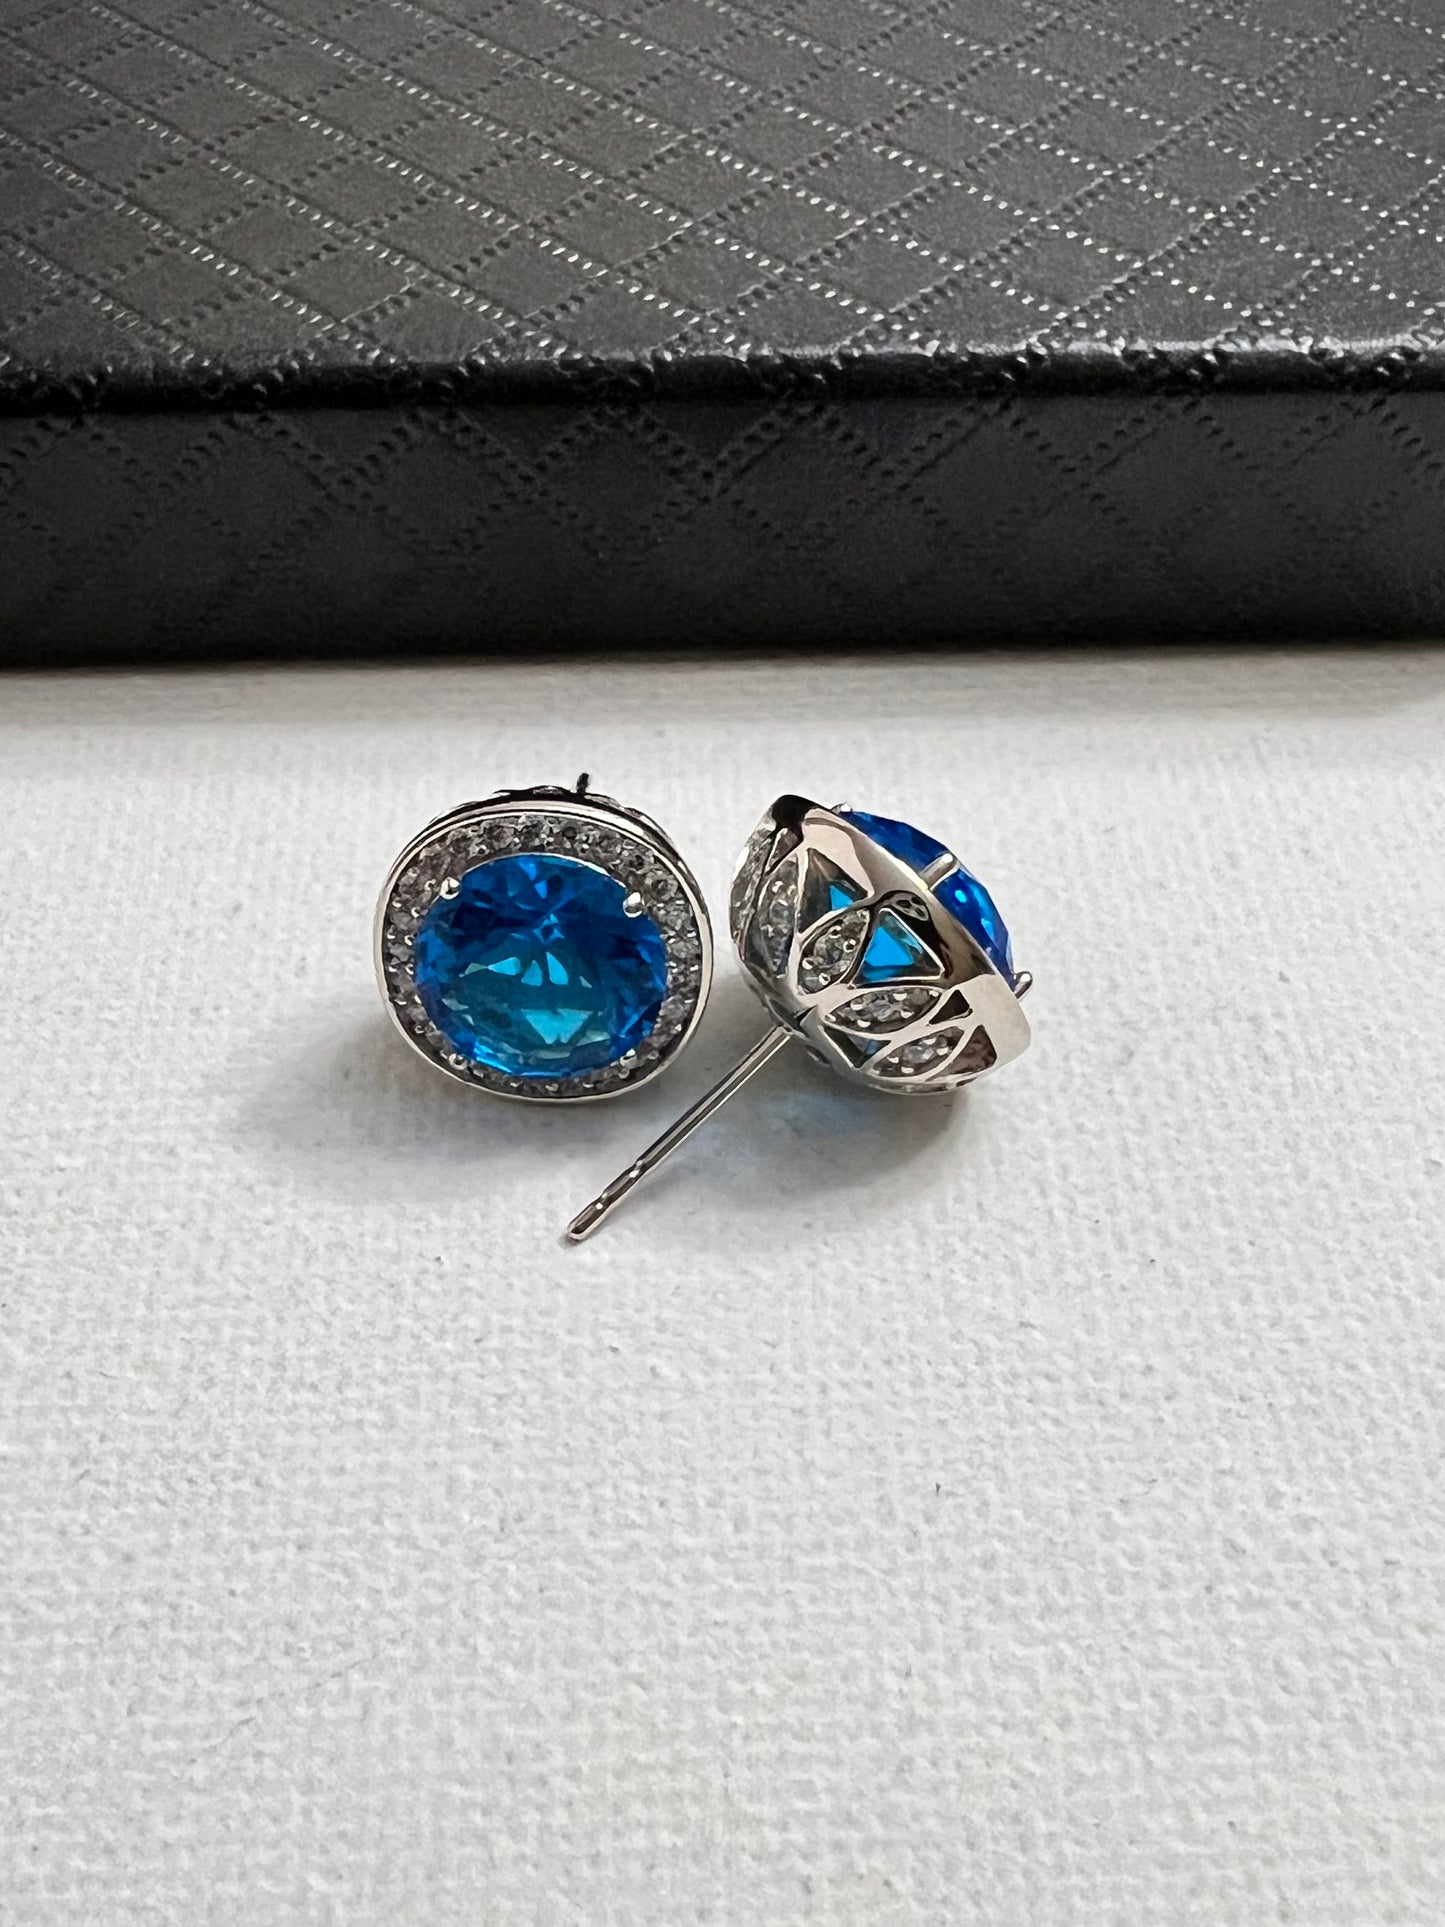 Captivating 3D Design: Front and Back Silver Stud Earrings - Elevate Your Style with Unique and Contemporary Fashion Accessories"